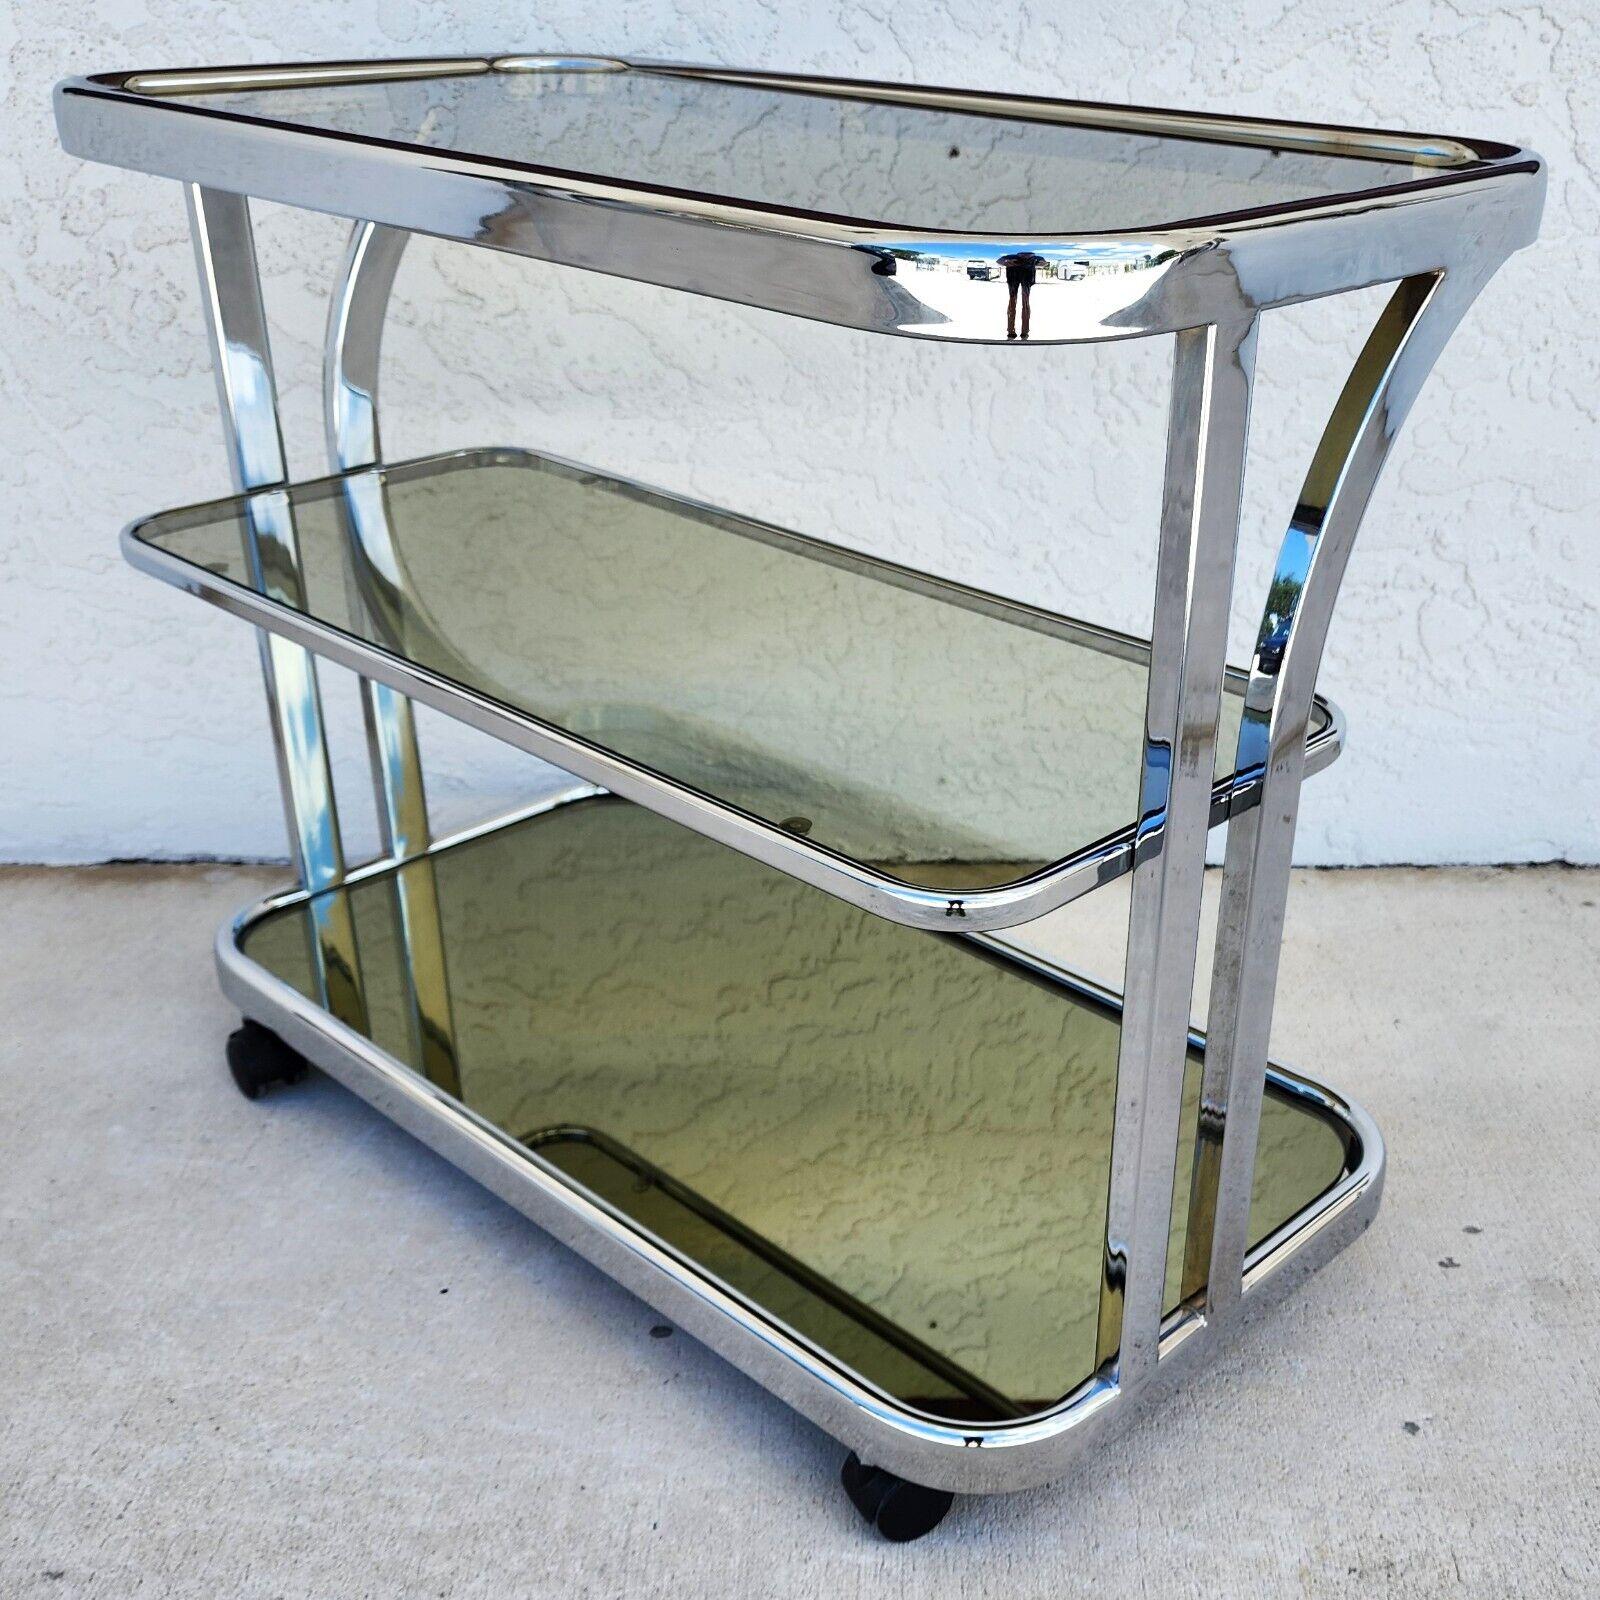 Vintage Rolling 1970s Chrome Bar Cart with Smoked Glass on Top 2 Shelves and Smoked Mirror on Bottom
The second shelf is inset so there is room for taller bottles there. Chrome is high-quality and is not plated.

Approximate Measurements in